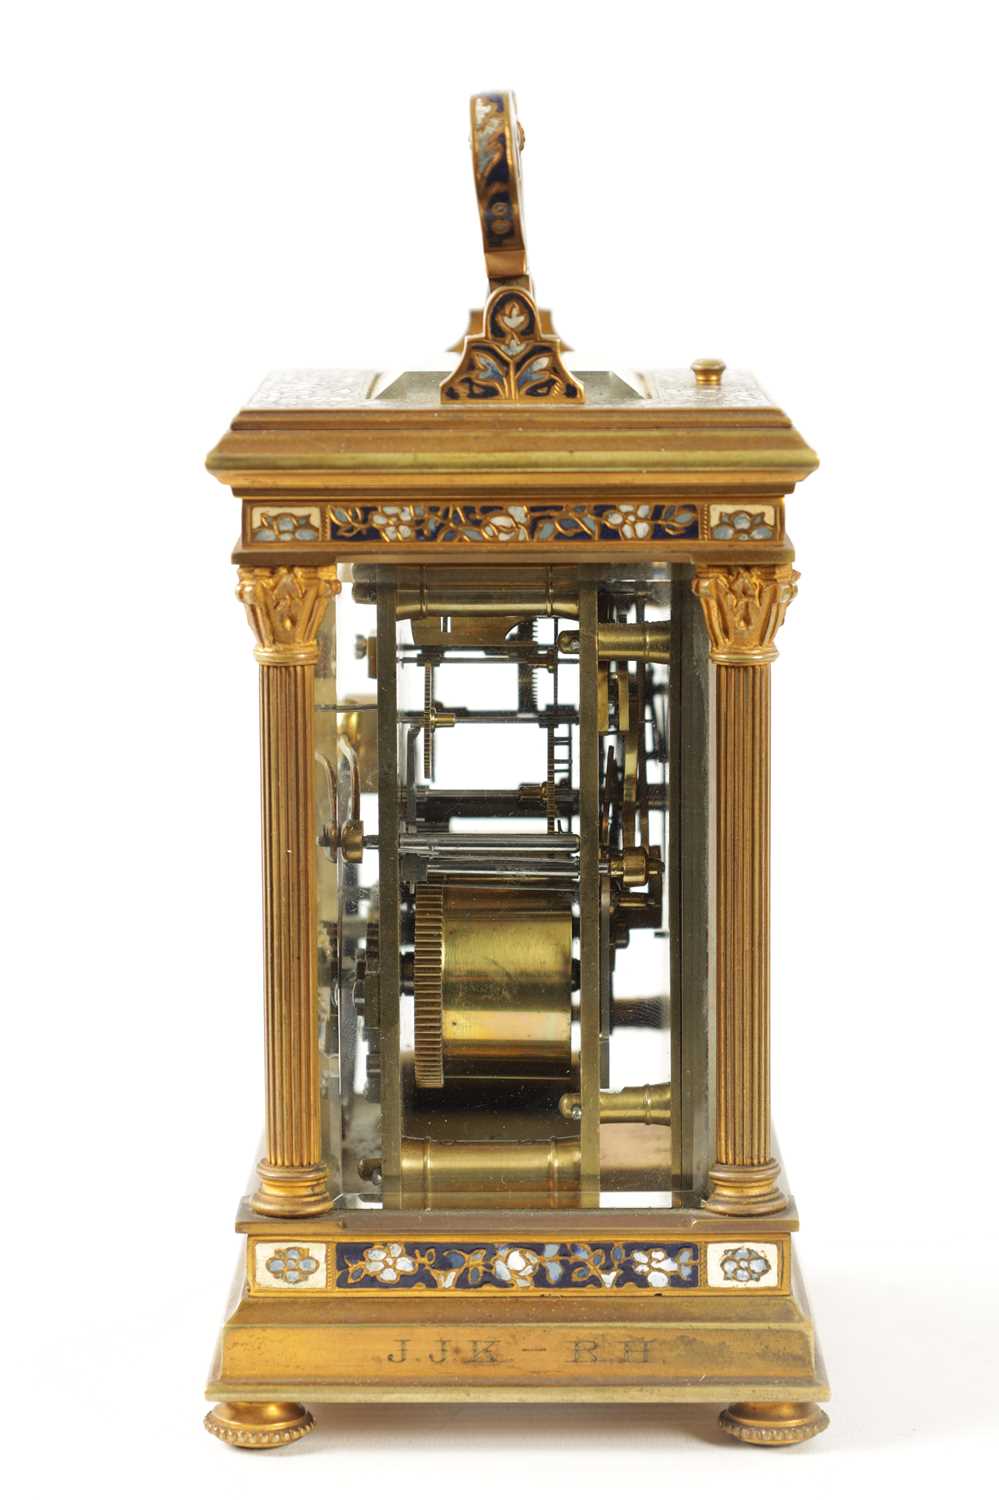 A LATE 19TH CENTURY FRENCH GILT BRASS AND CHAMPLEVE ENAMEL REPEATING CARRIAGE CLOCK - Image 9 of 9